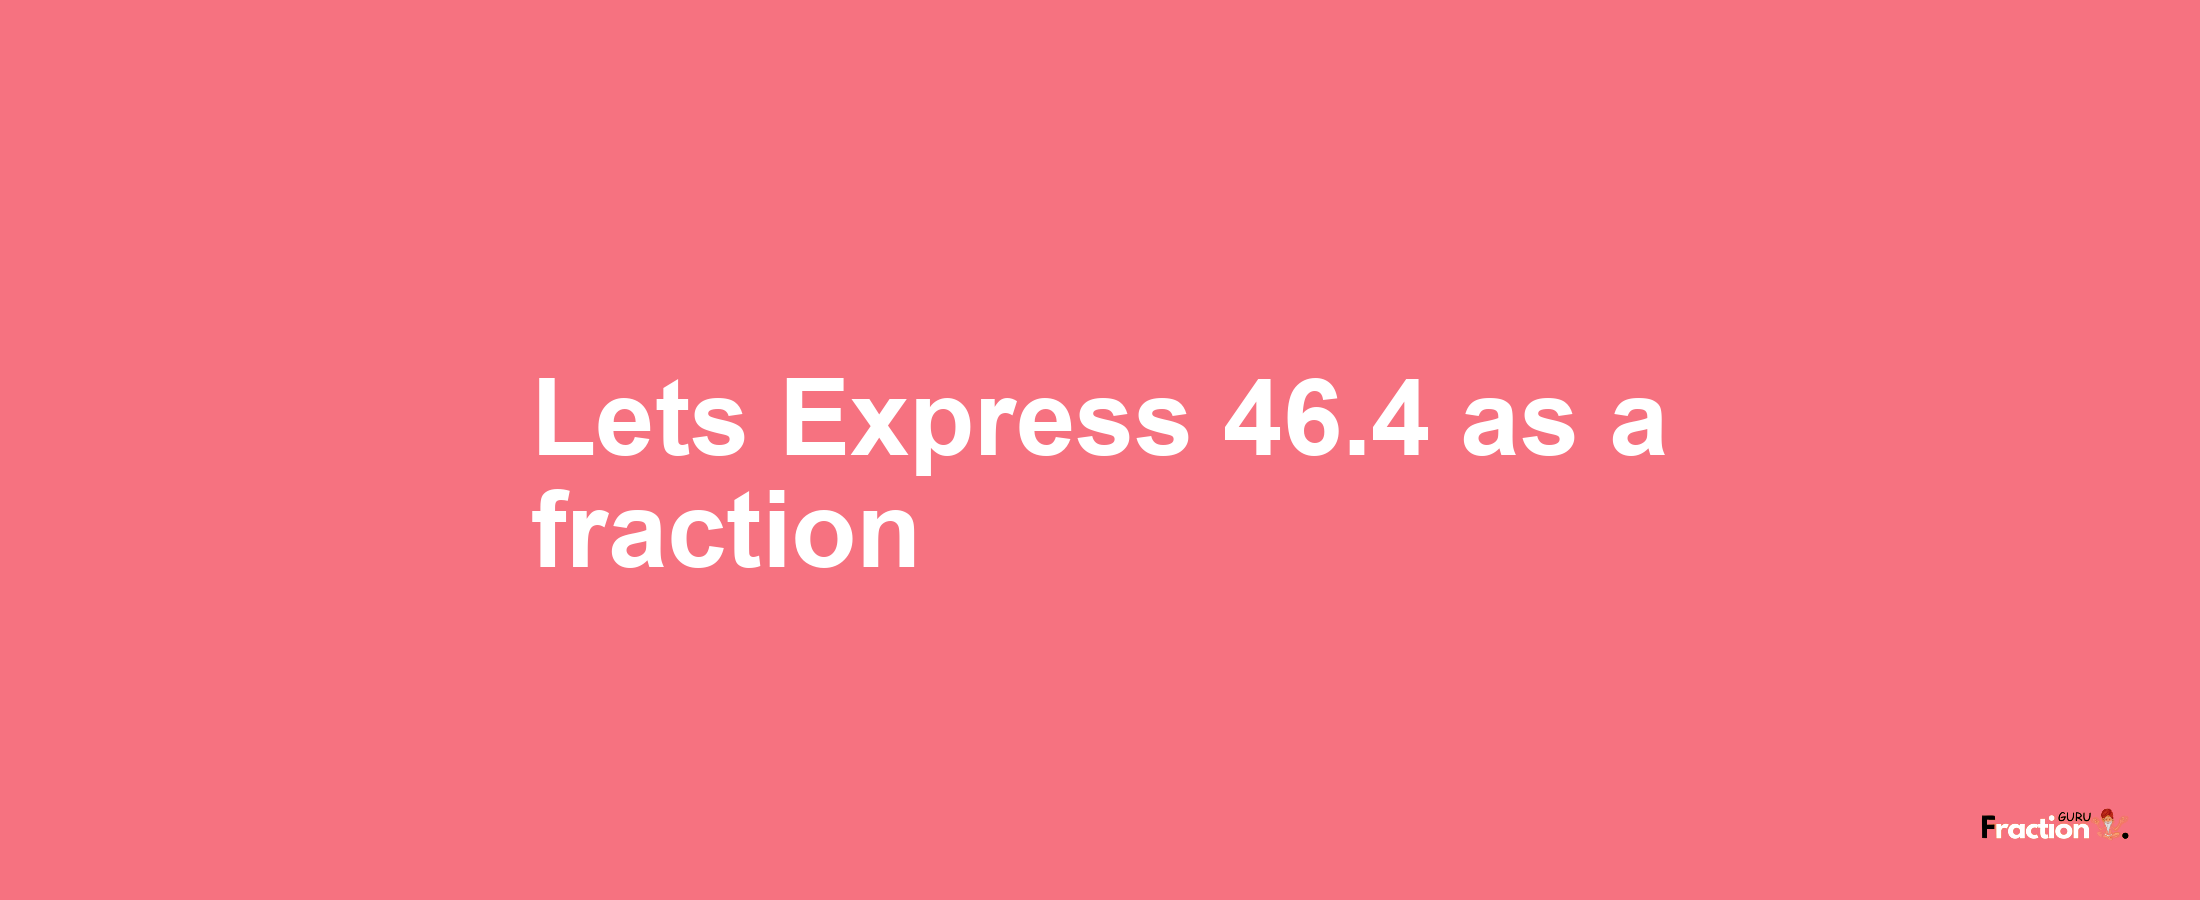 Lets Express 46.4 as afraction